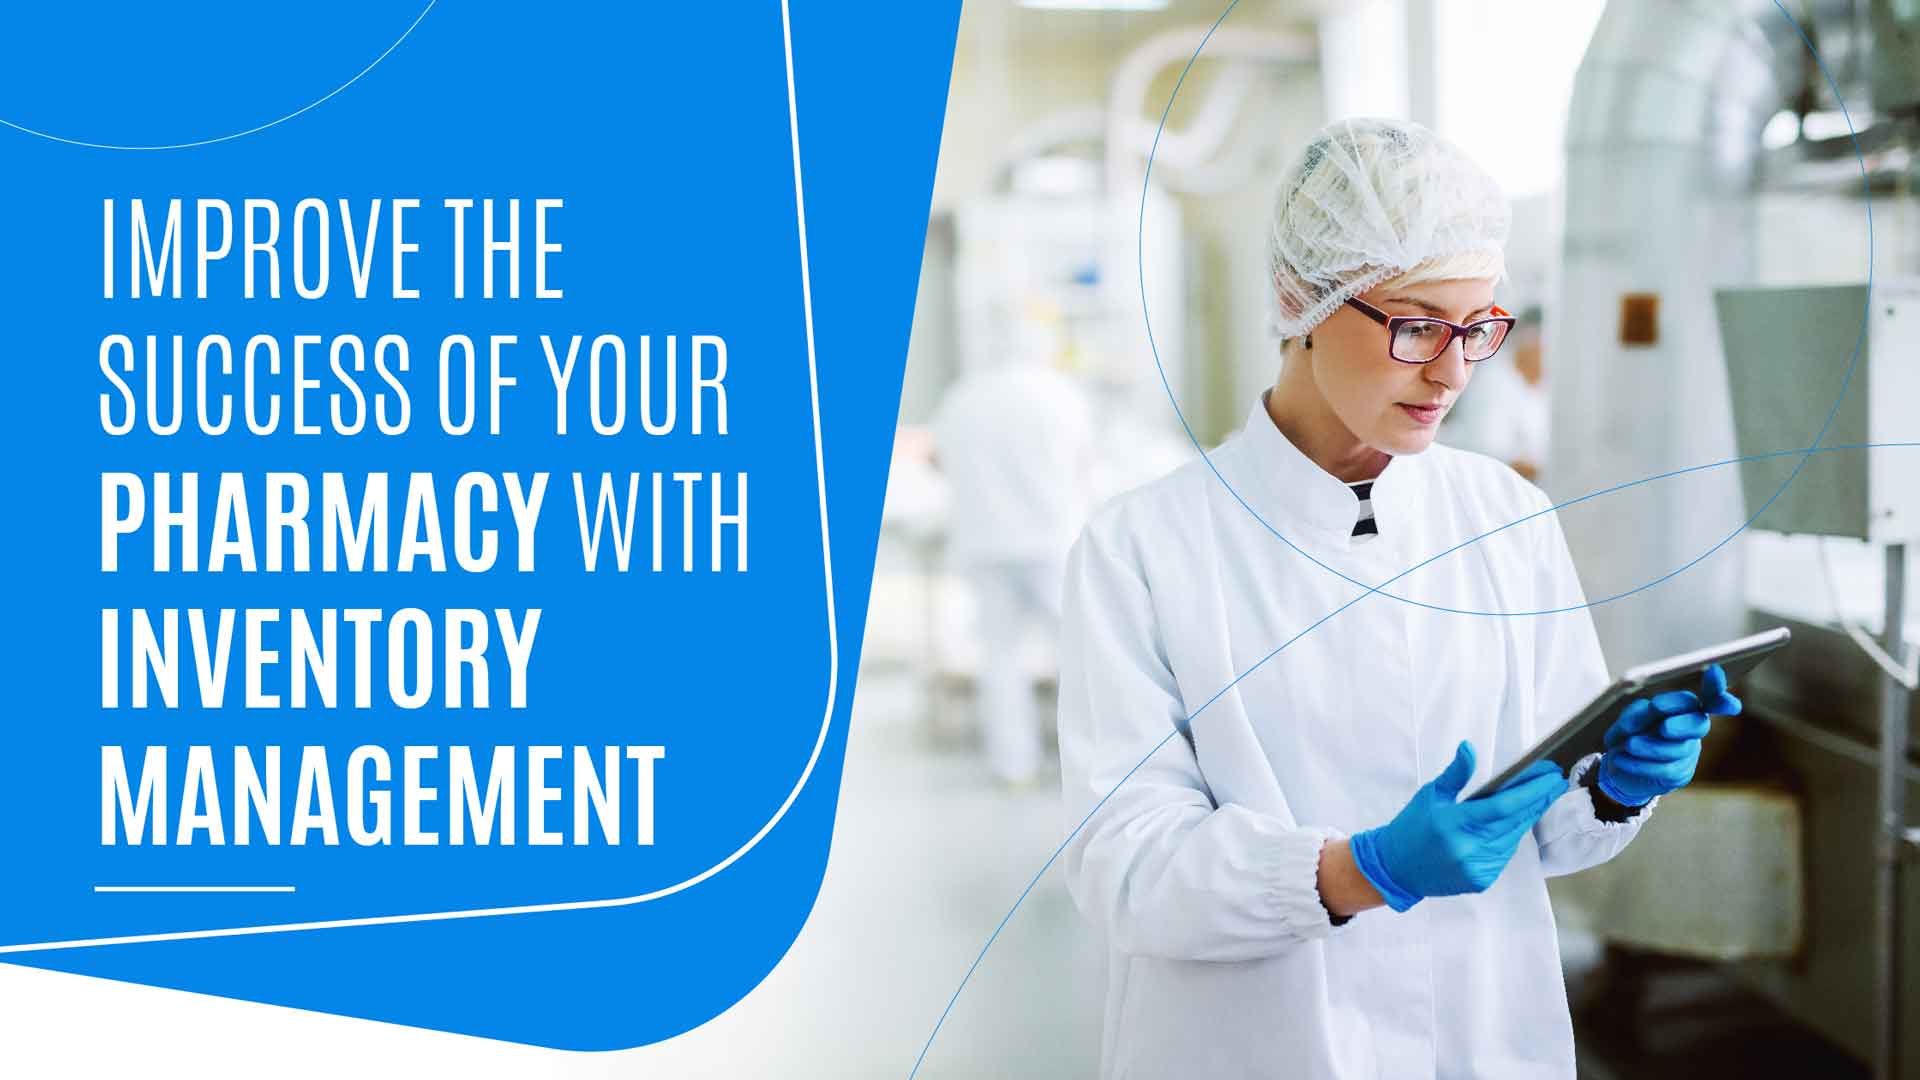 Improve the success of your pharmacy with inventory management